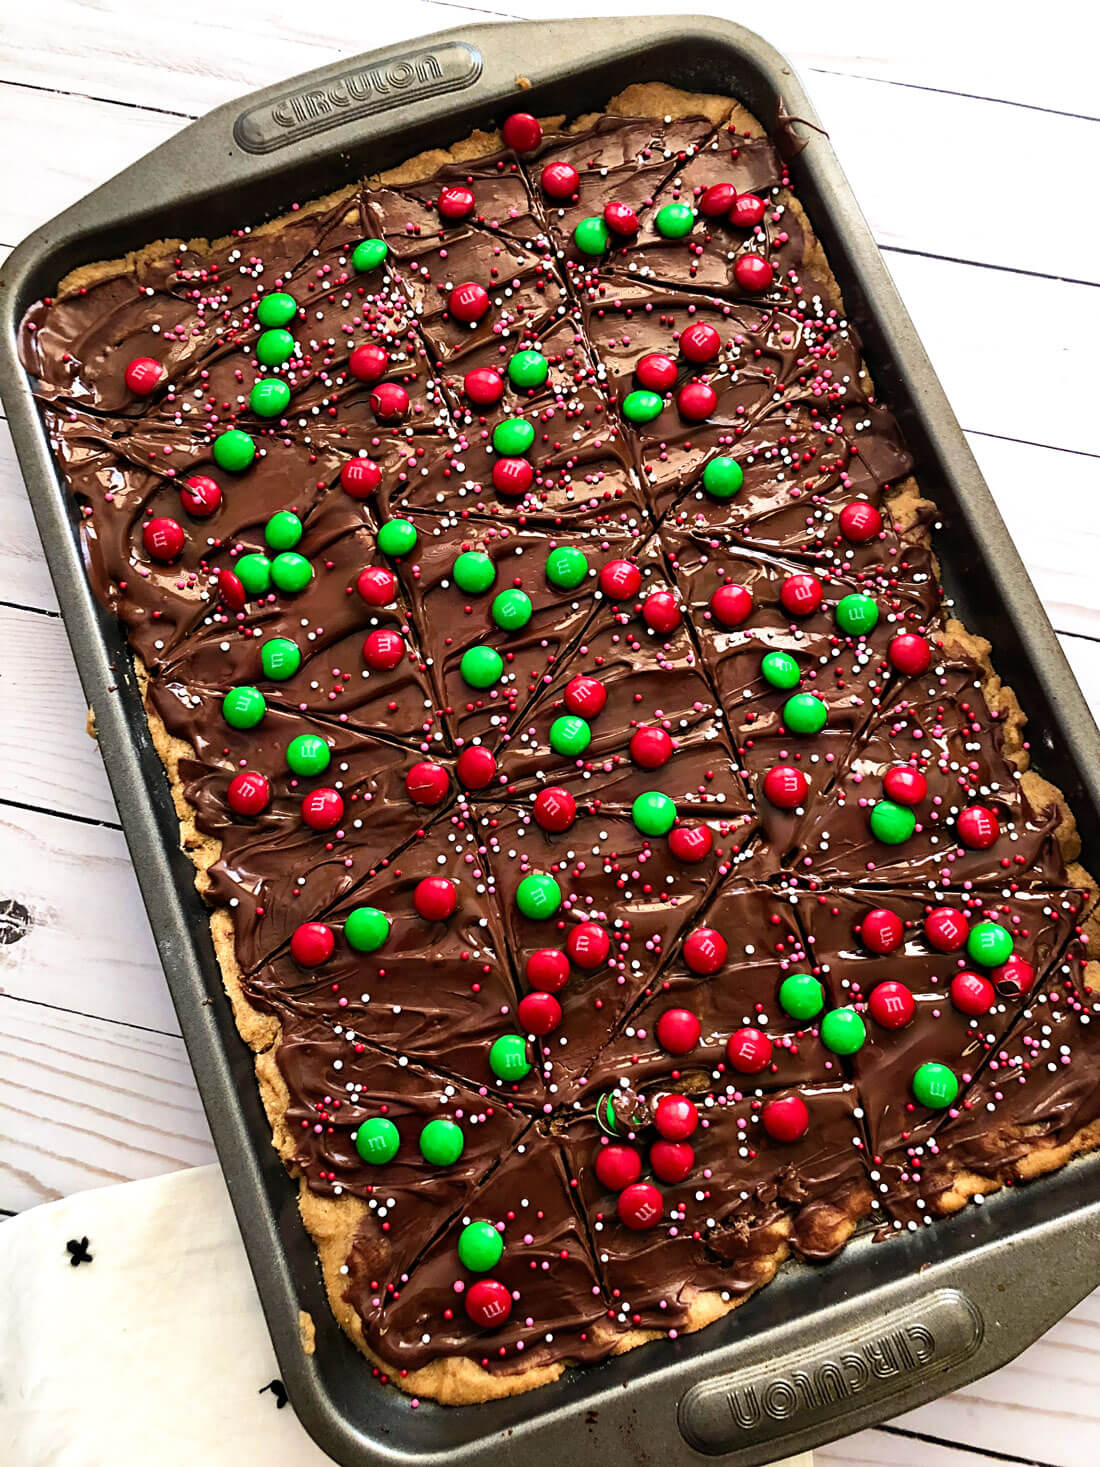 Cut into triangles and serve Christmas Cookie Bars